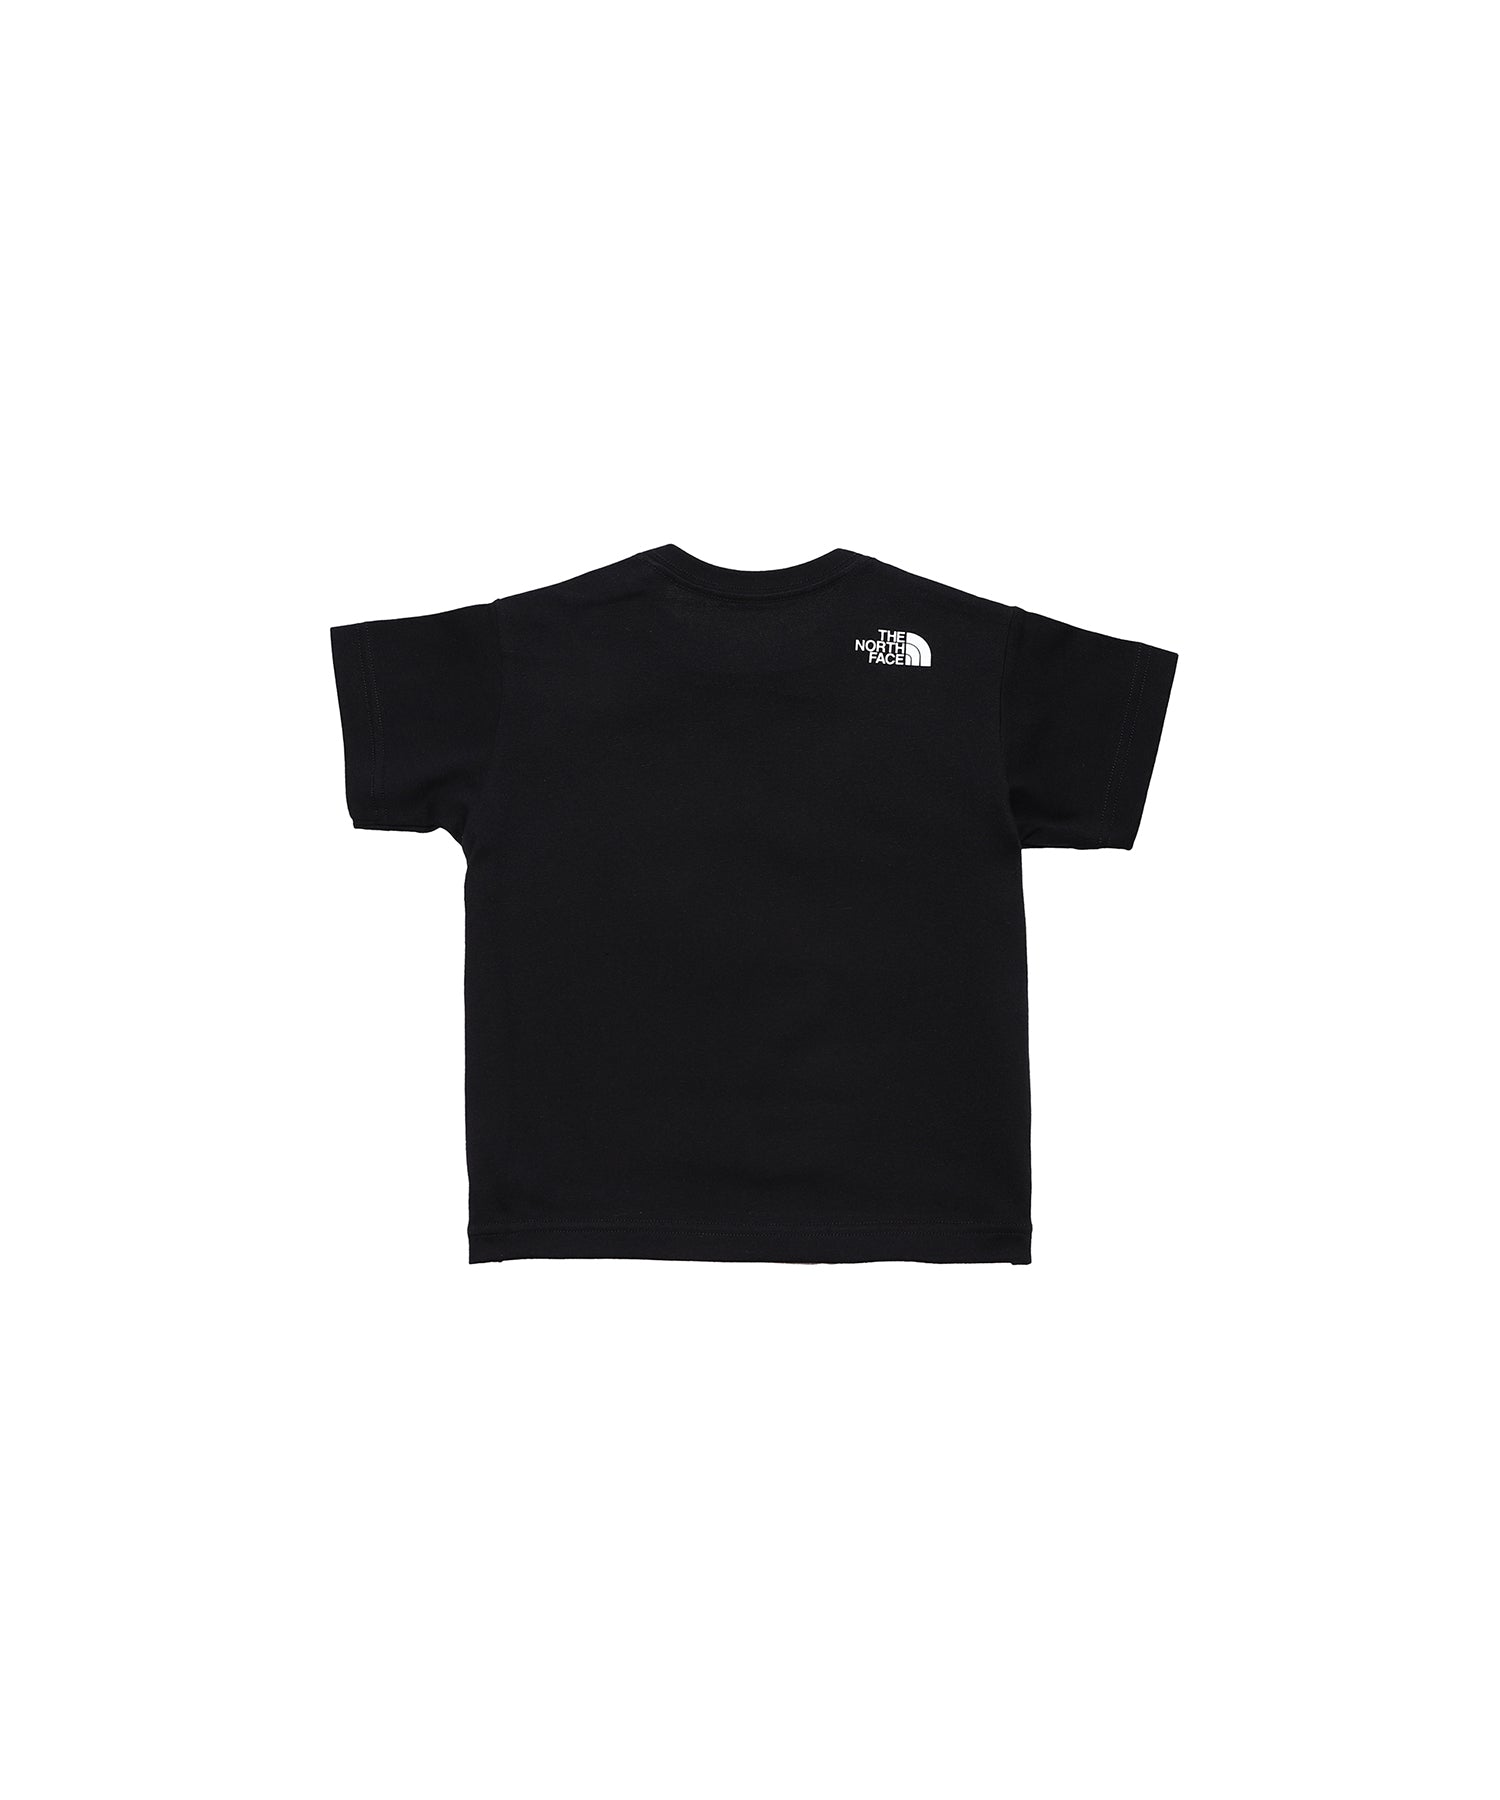 Baby S/S Small Square Logo Tee